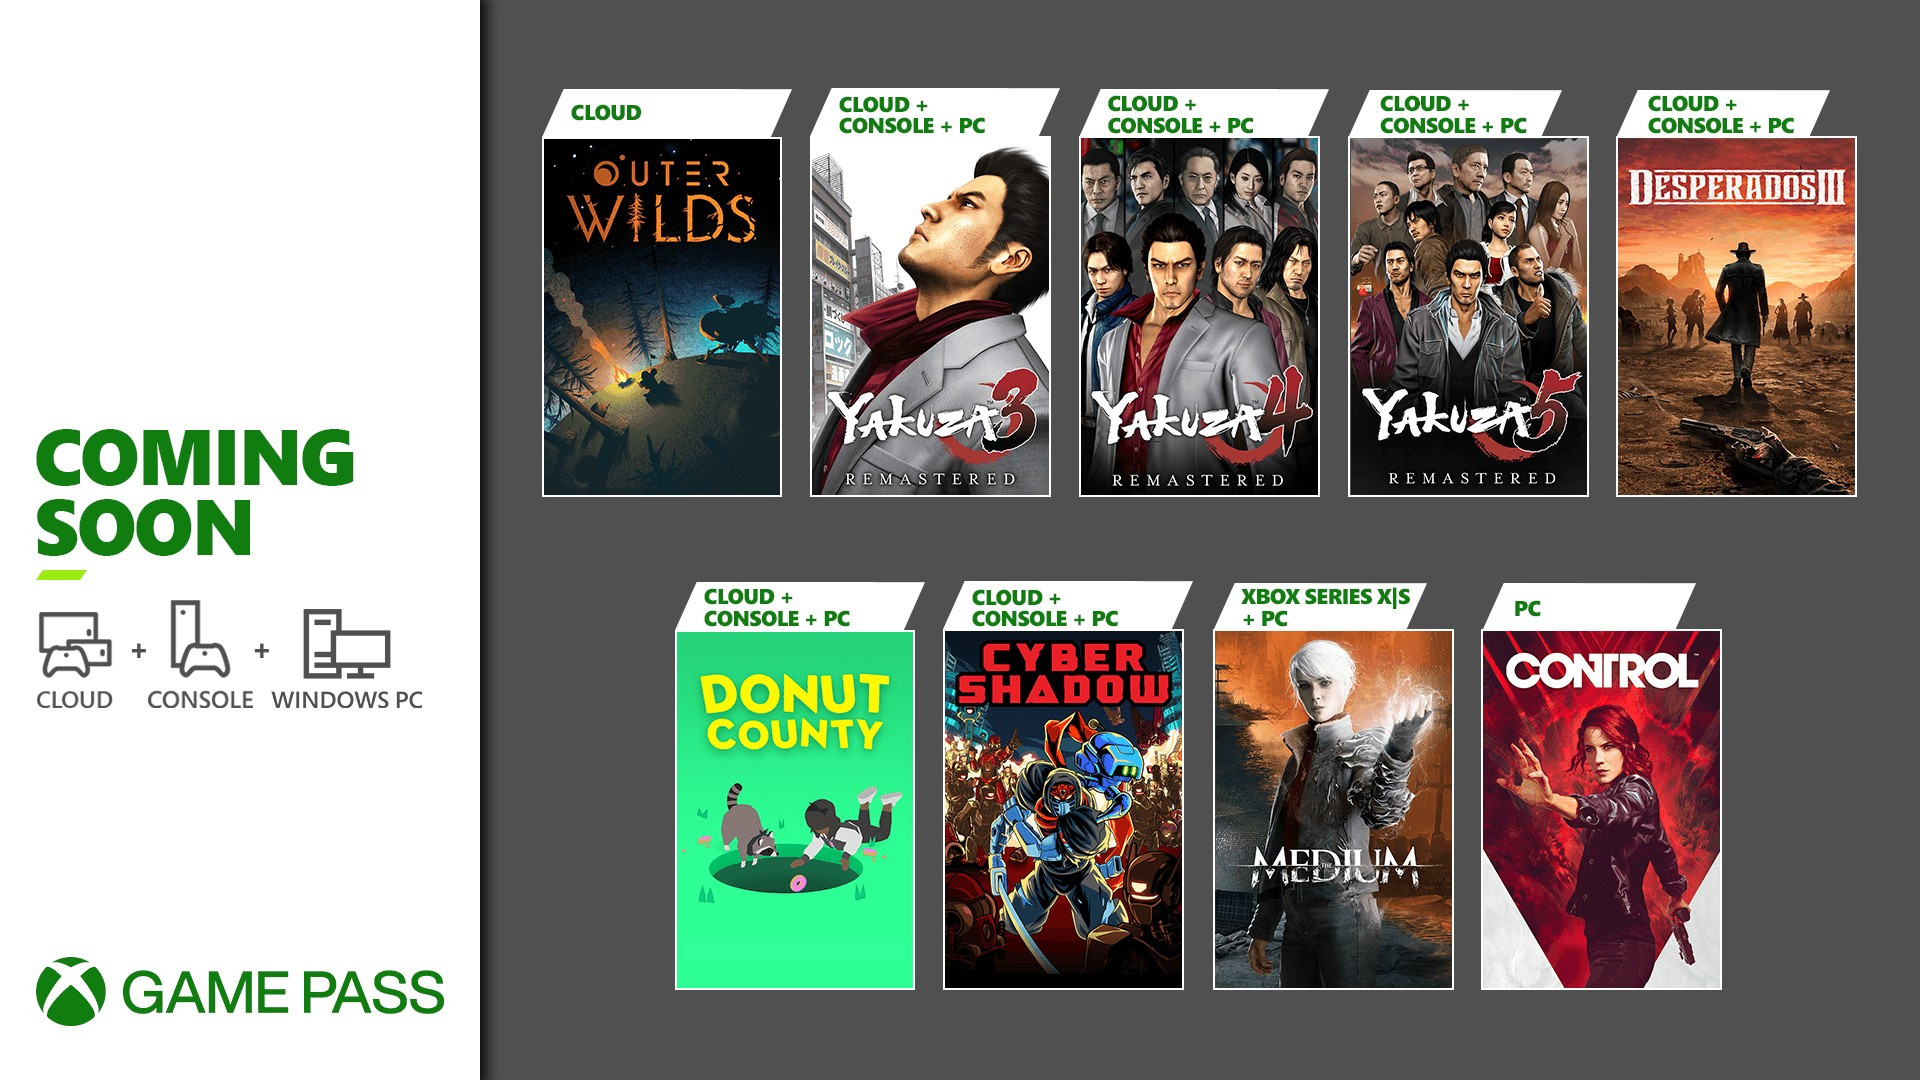 New Games Announced for Xbox Game Pass in January